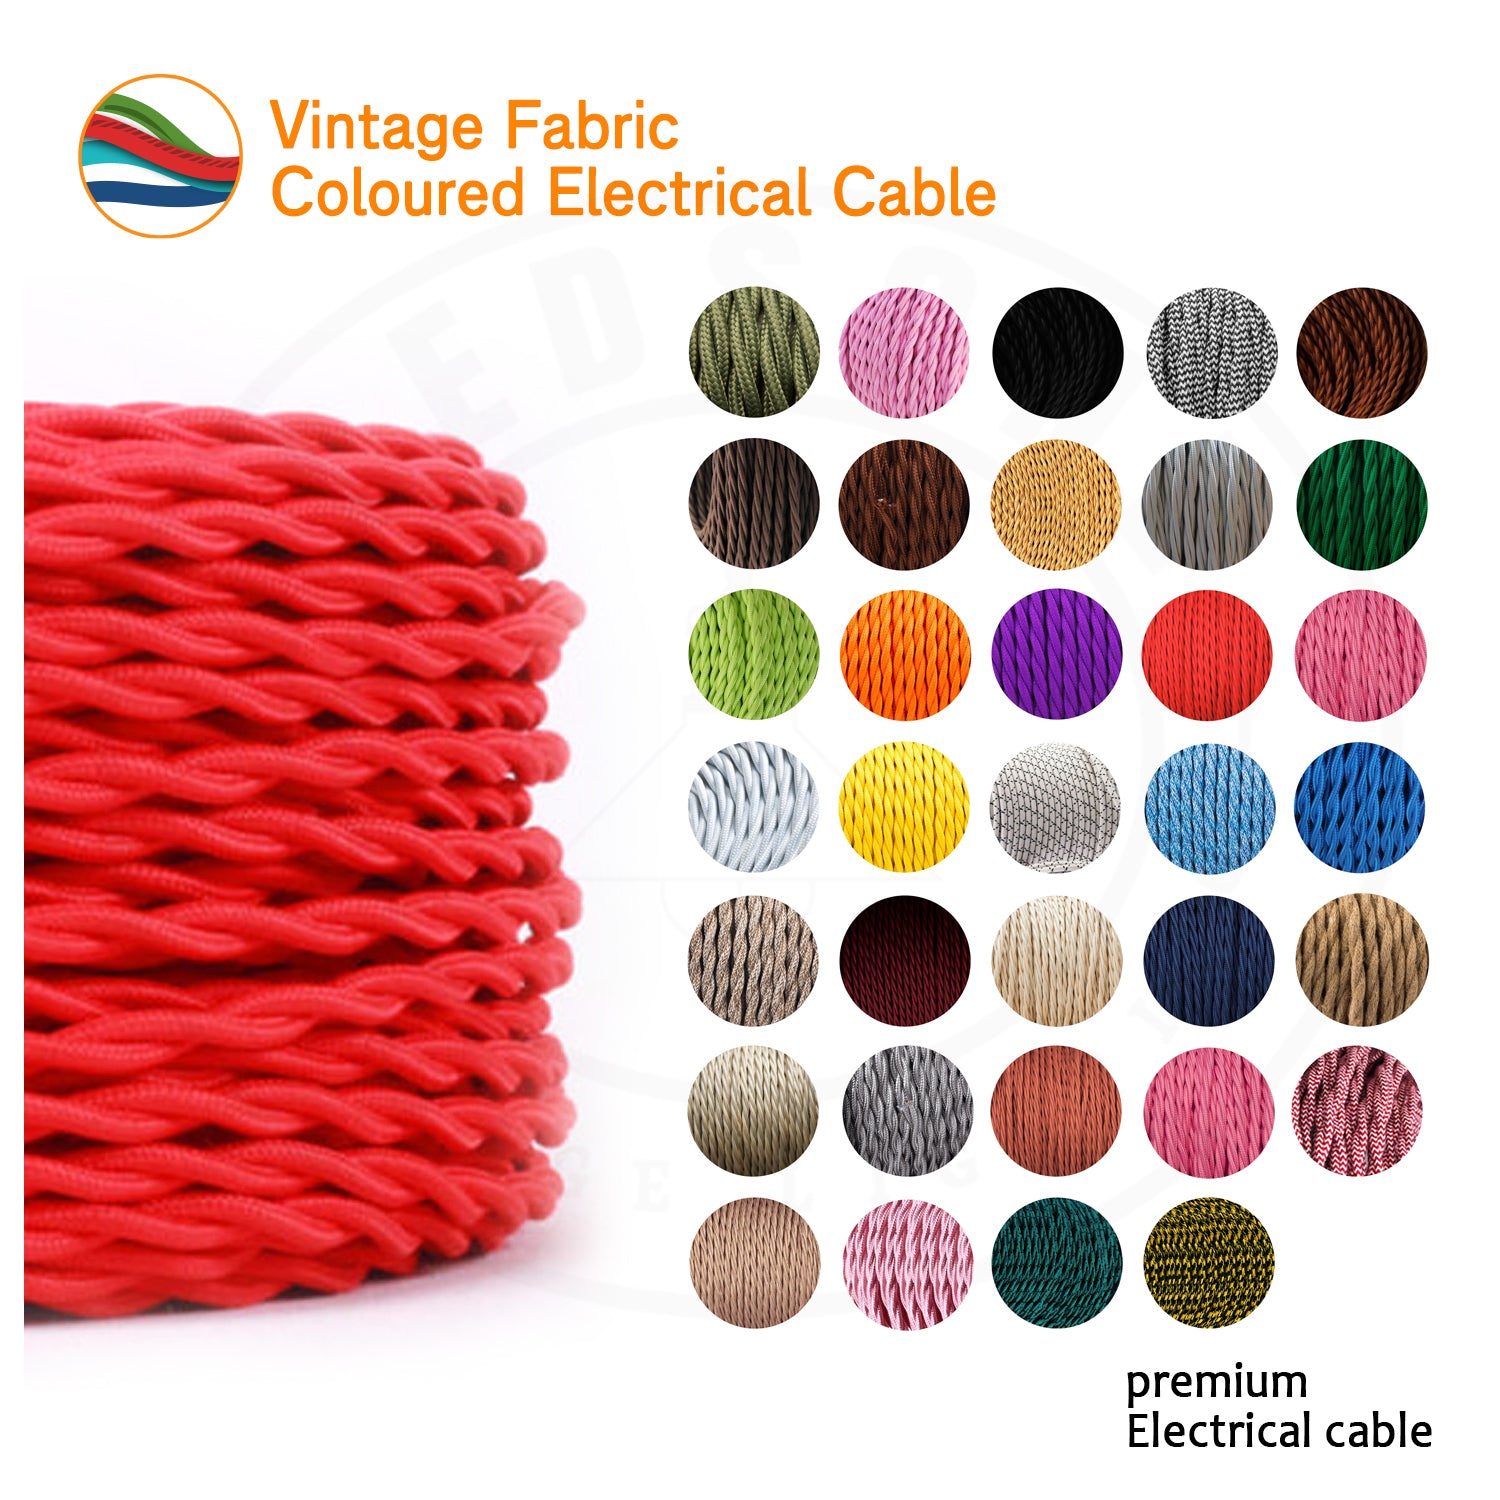 Vintage 3-Core Twisted Electrical Fabric Cable 